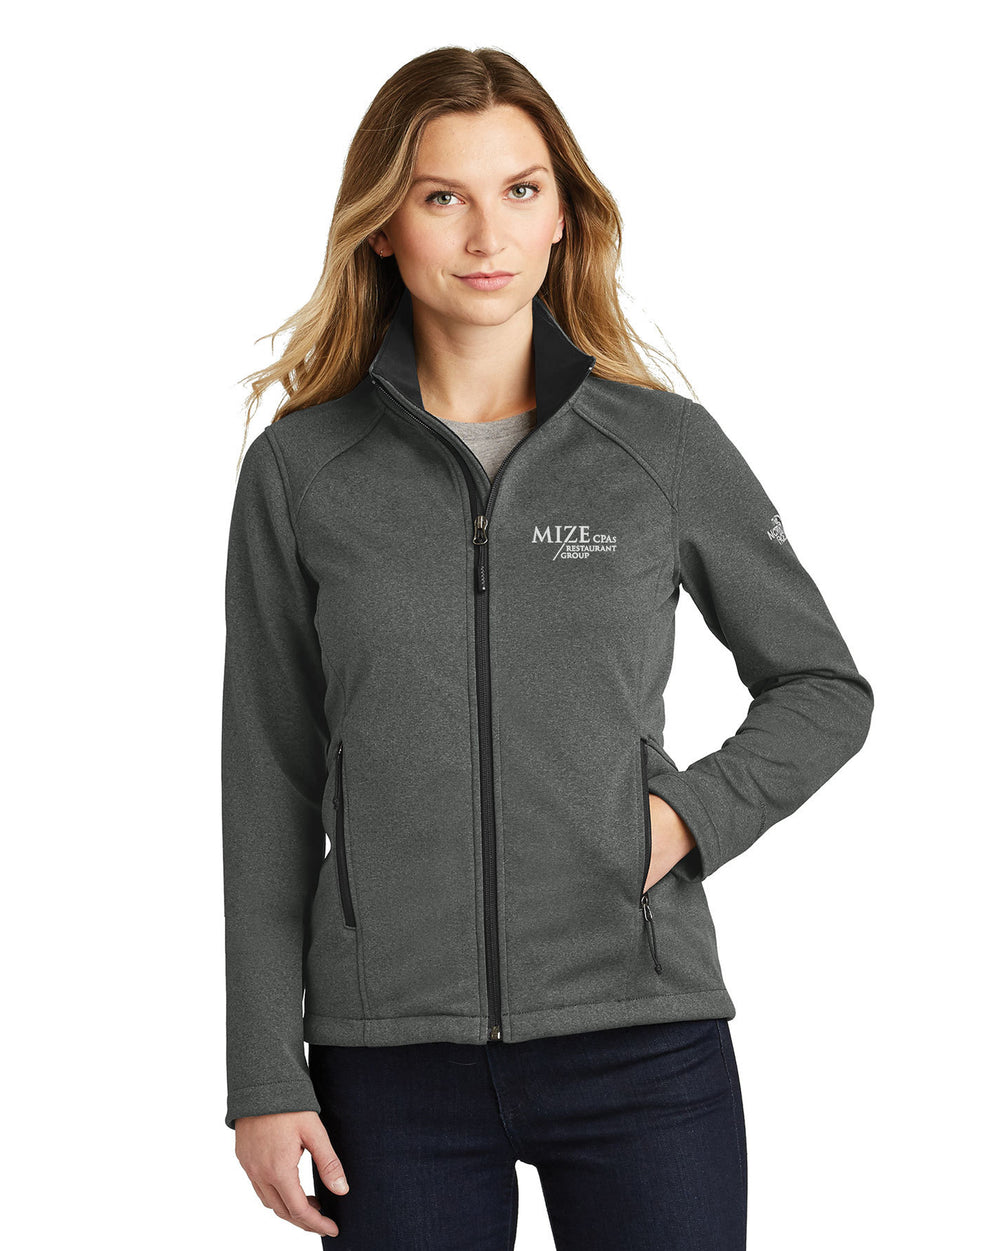 Mize Restaurant Group - The North Face Ladies Ridgewall Soft Shell Jacket - NF0A3LGY